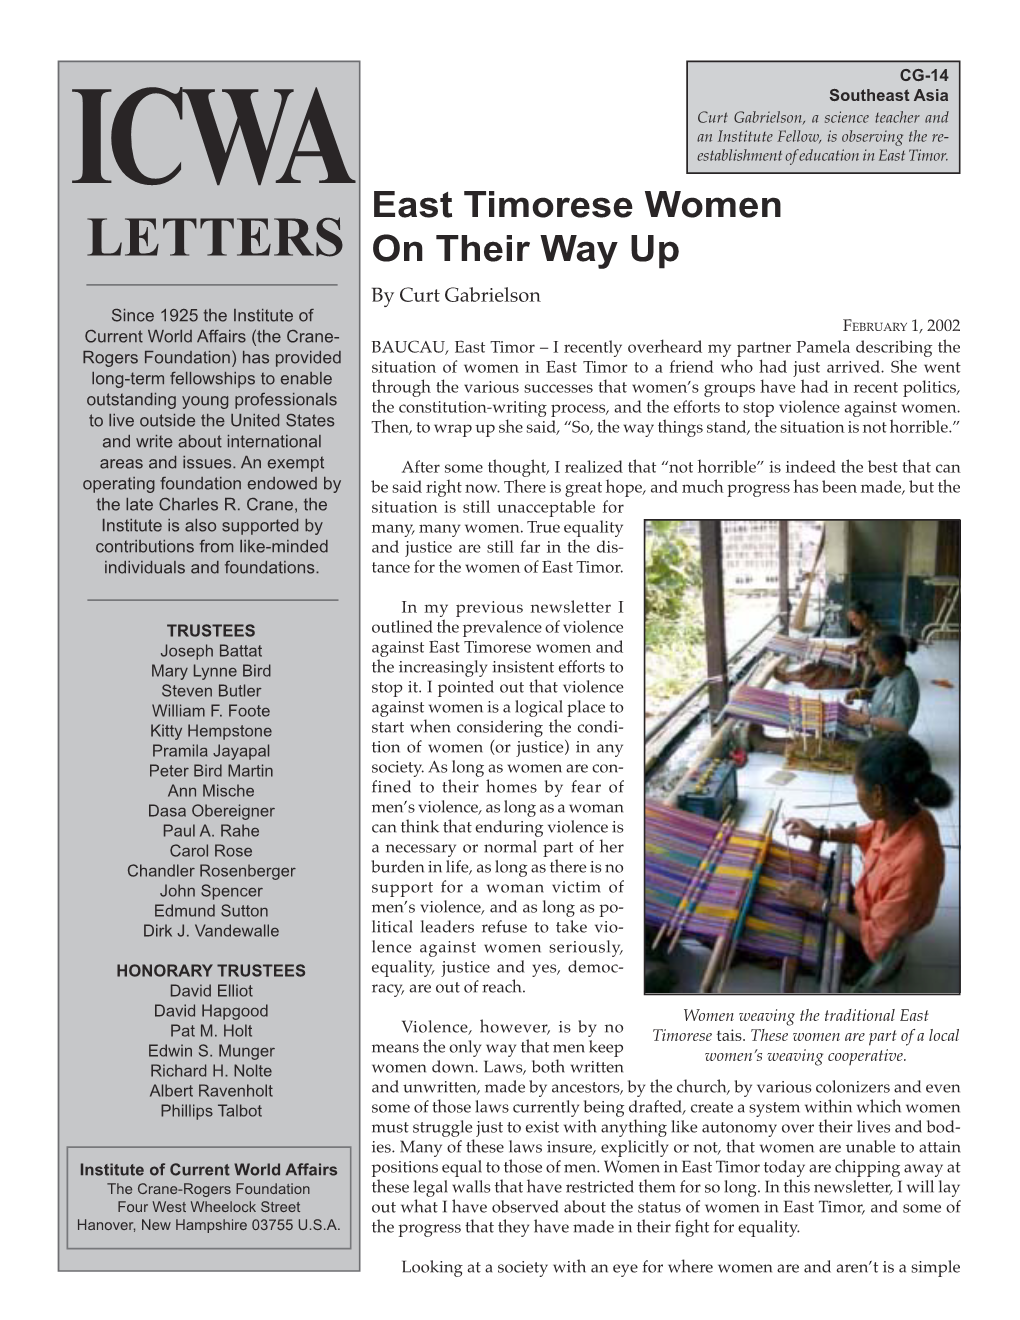 East Timorese Women on Their Way Up